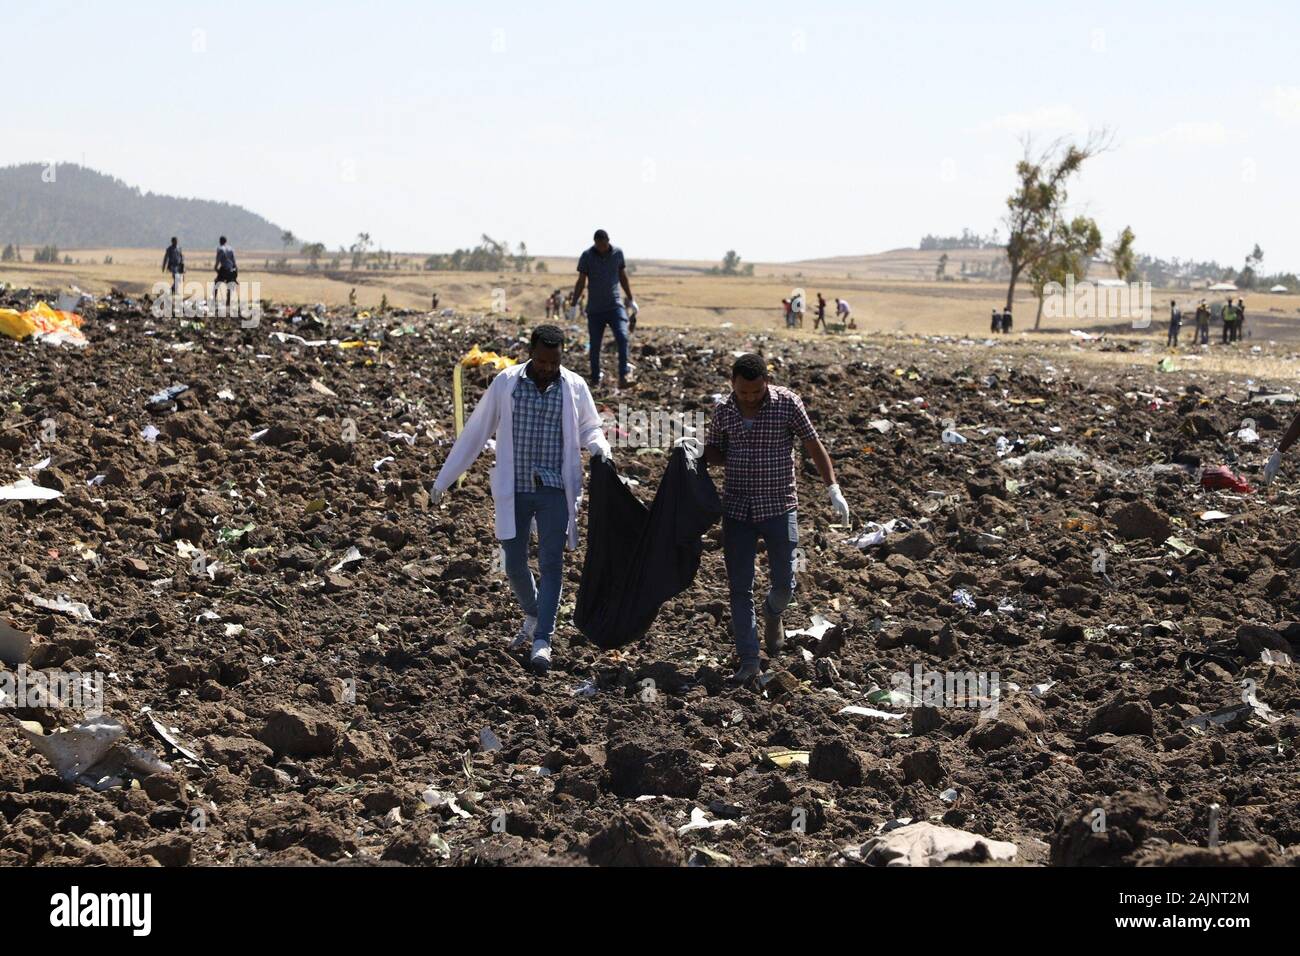 Beijing, Ethiopia. 10th Mar, 2019. Rescuers look for wreckage of an Ethiopian Airlines aircraft at the crash site near Bishoftu town, about 45 kilometers from the capital Addis Ababa, Ethiopia, March 10, 2019. The Nairobi-bound Boeing 737-8 MAX crashed on March 10, 2019 just minutes after takeoff from Addis Ababa Bole International Airport, killing all 157 people aboard. Earlier on March 11, 2019, Ethiopian Airlines announced its decision to suspend commercial operations of all Boeing 737-Max 8 aircraft. Credit: Michael Tewelde/Xinhua/Alamy Live News Stock Photo